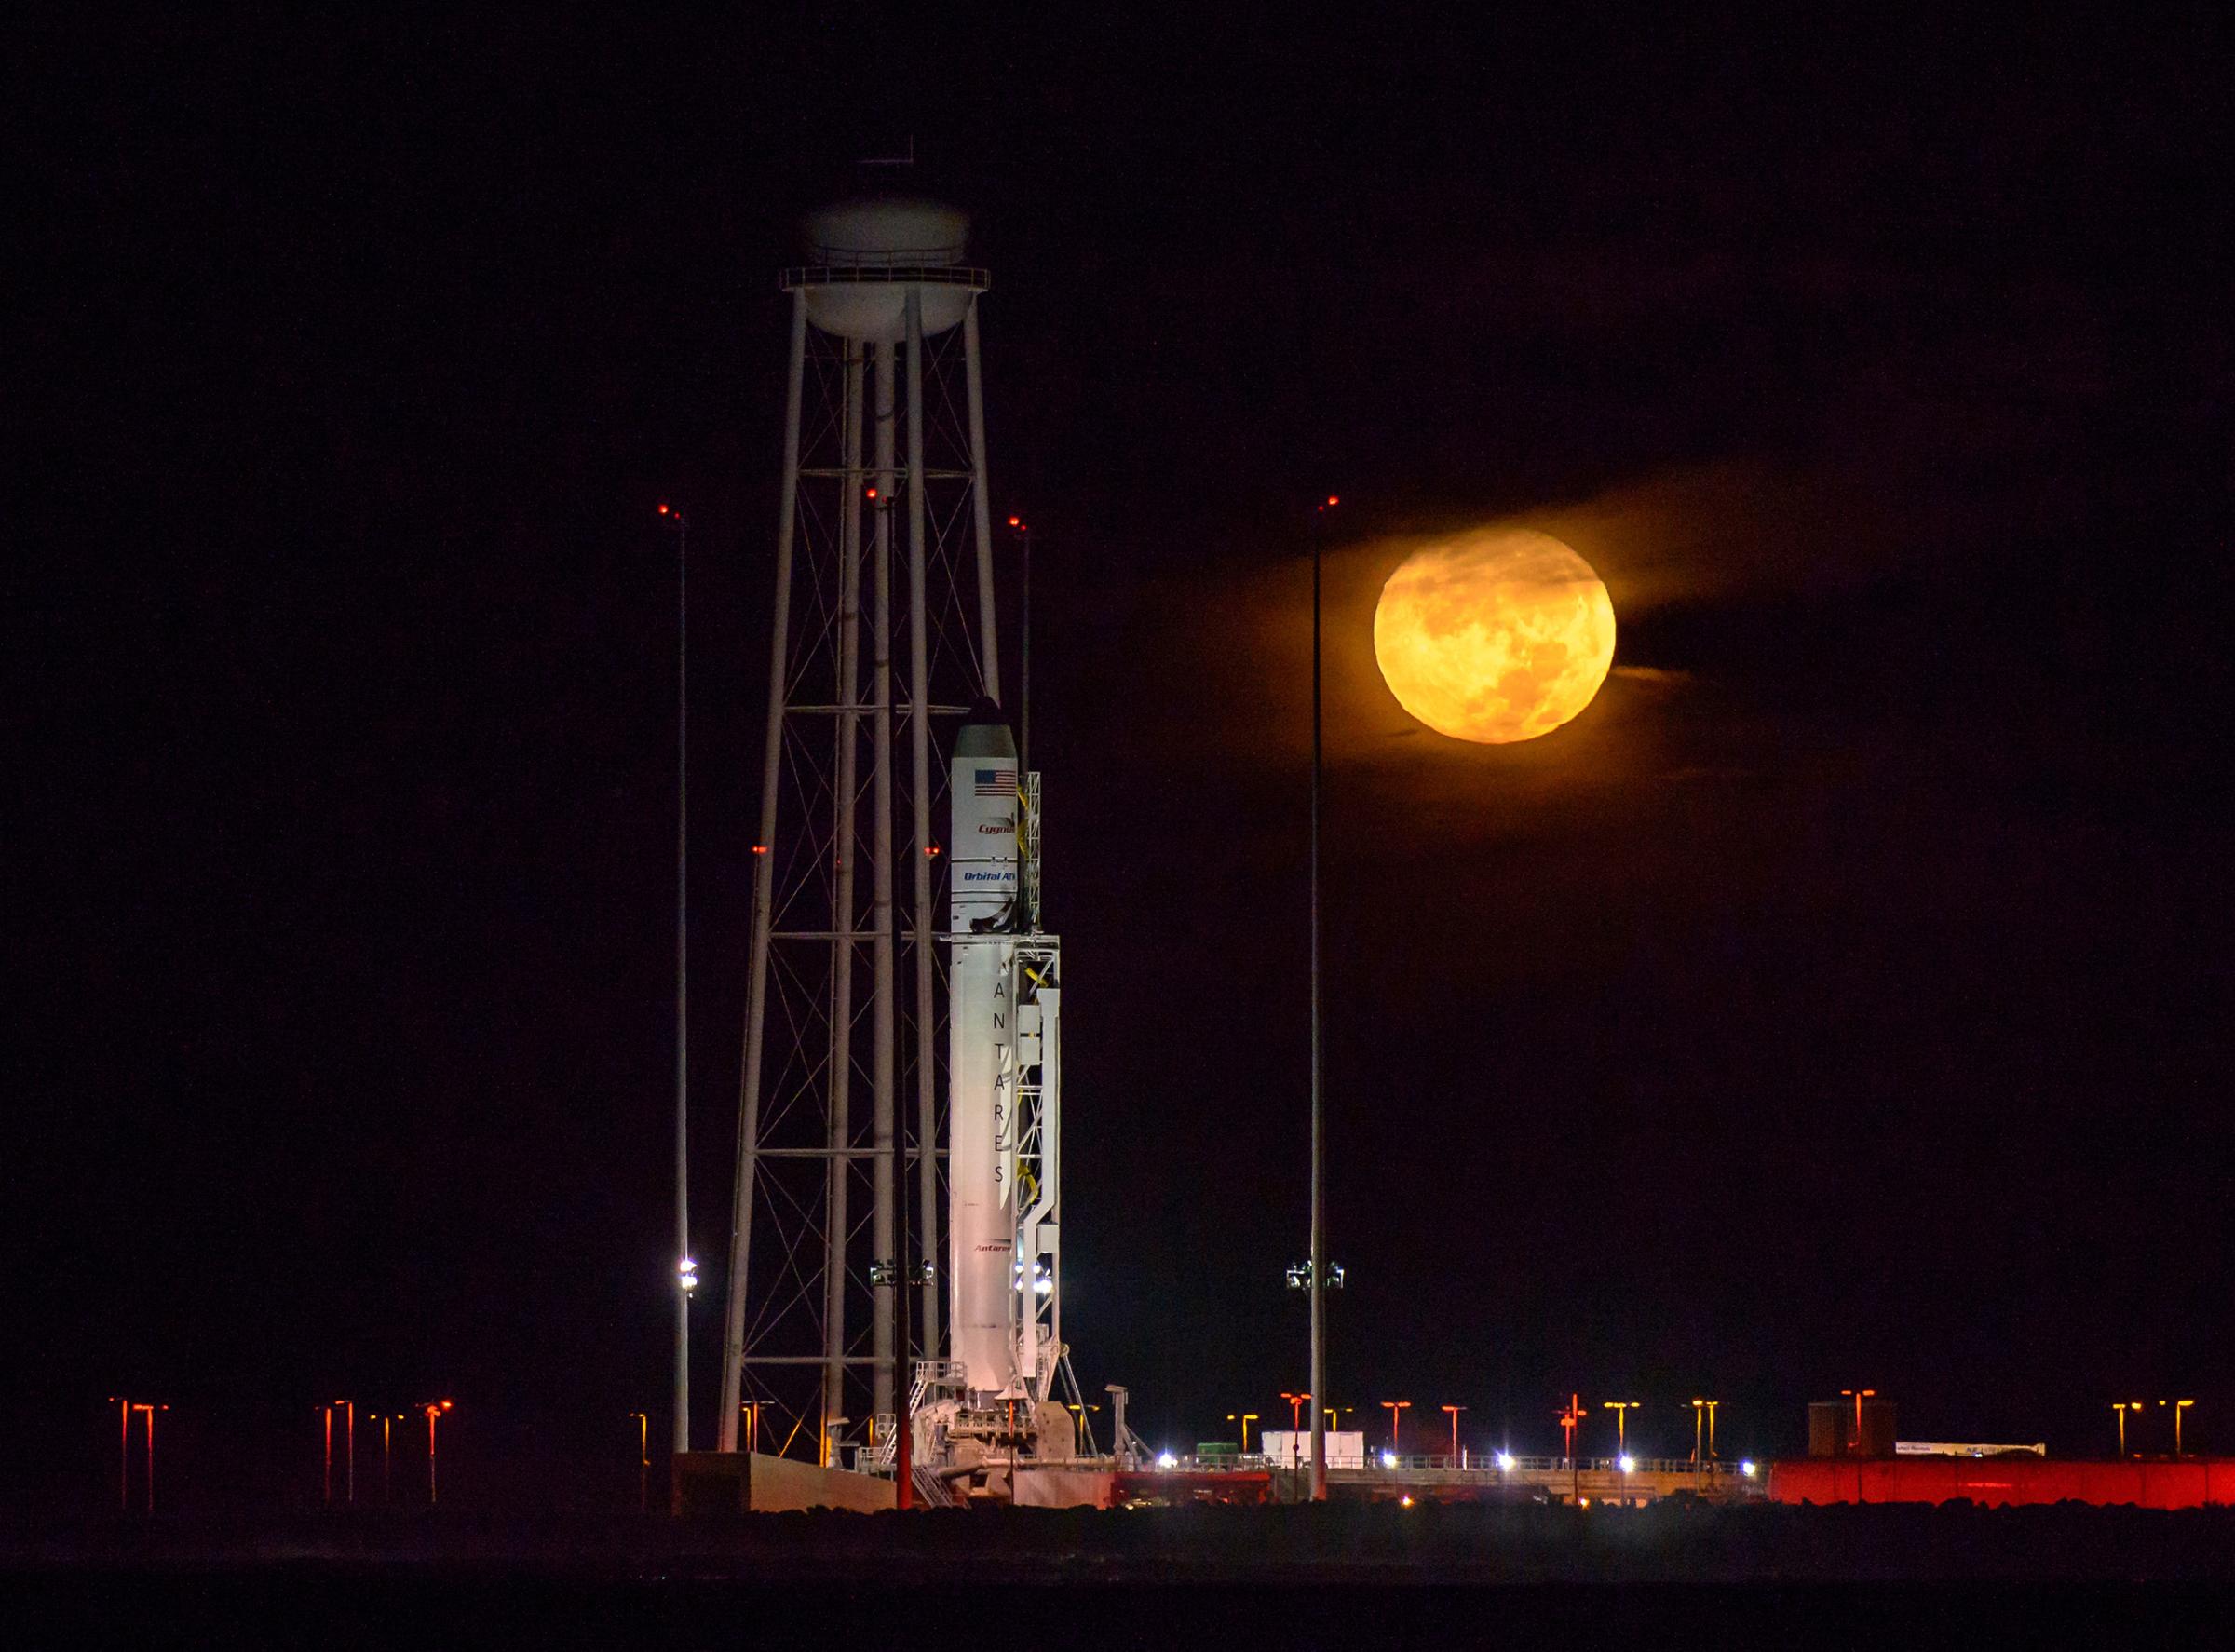 The Orbital ATK Antares rocket, with the Cygnus spacecraft onboard, is seen on launch Pad-0A as the moon sets, predawn, on Oct. 15, 2016 at NASA's Wallops Flight Facility in Virginia.